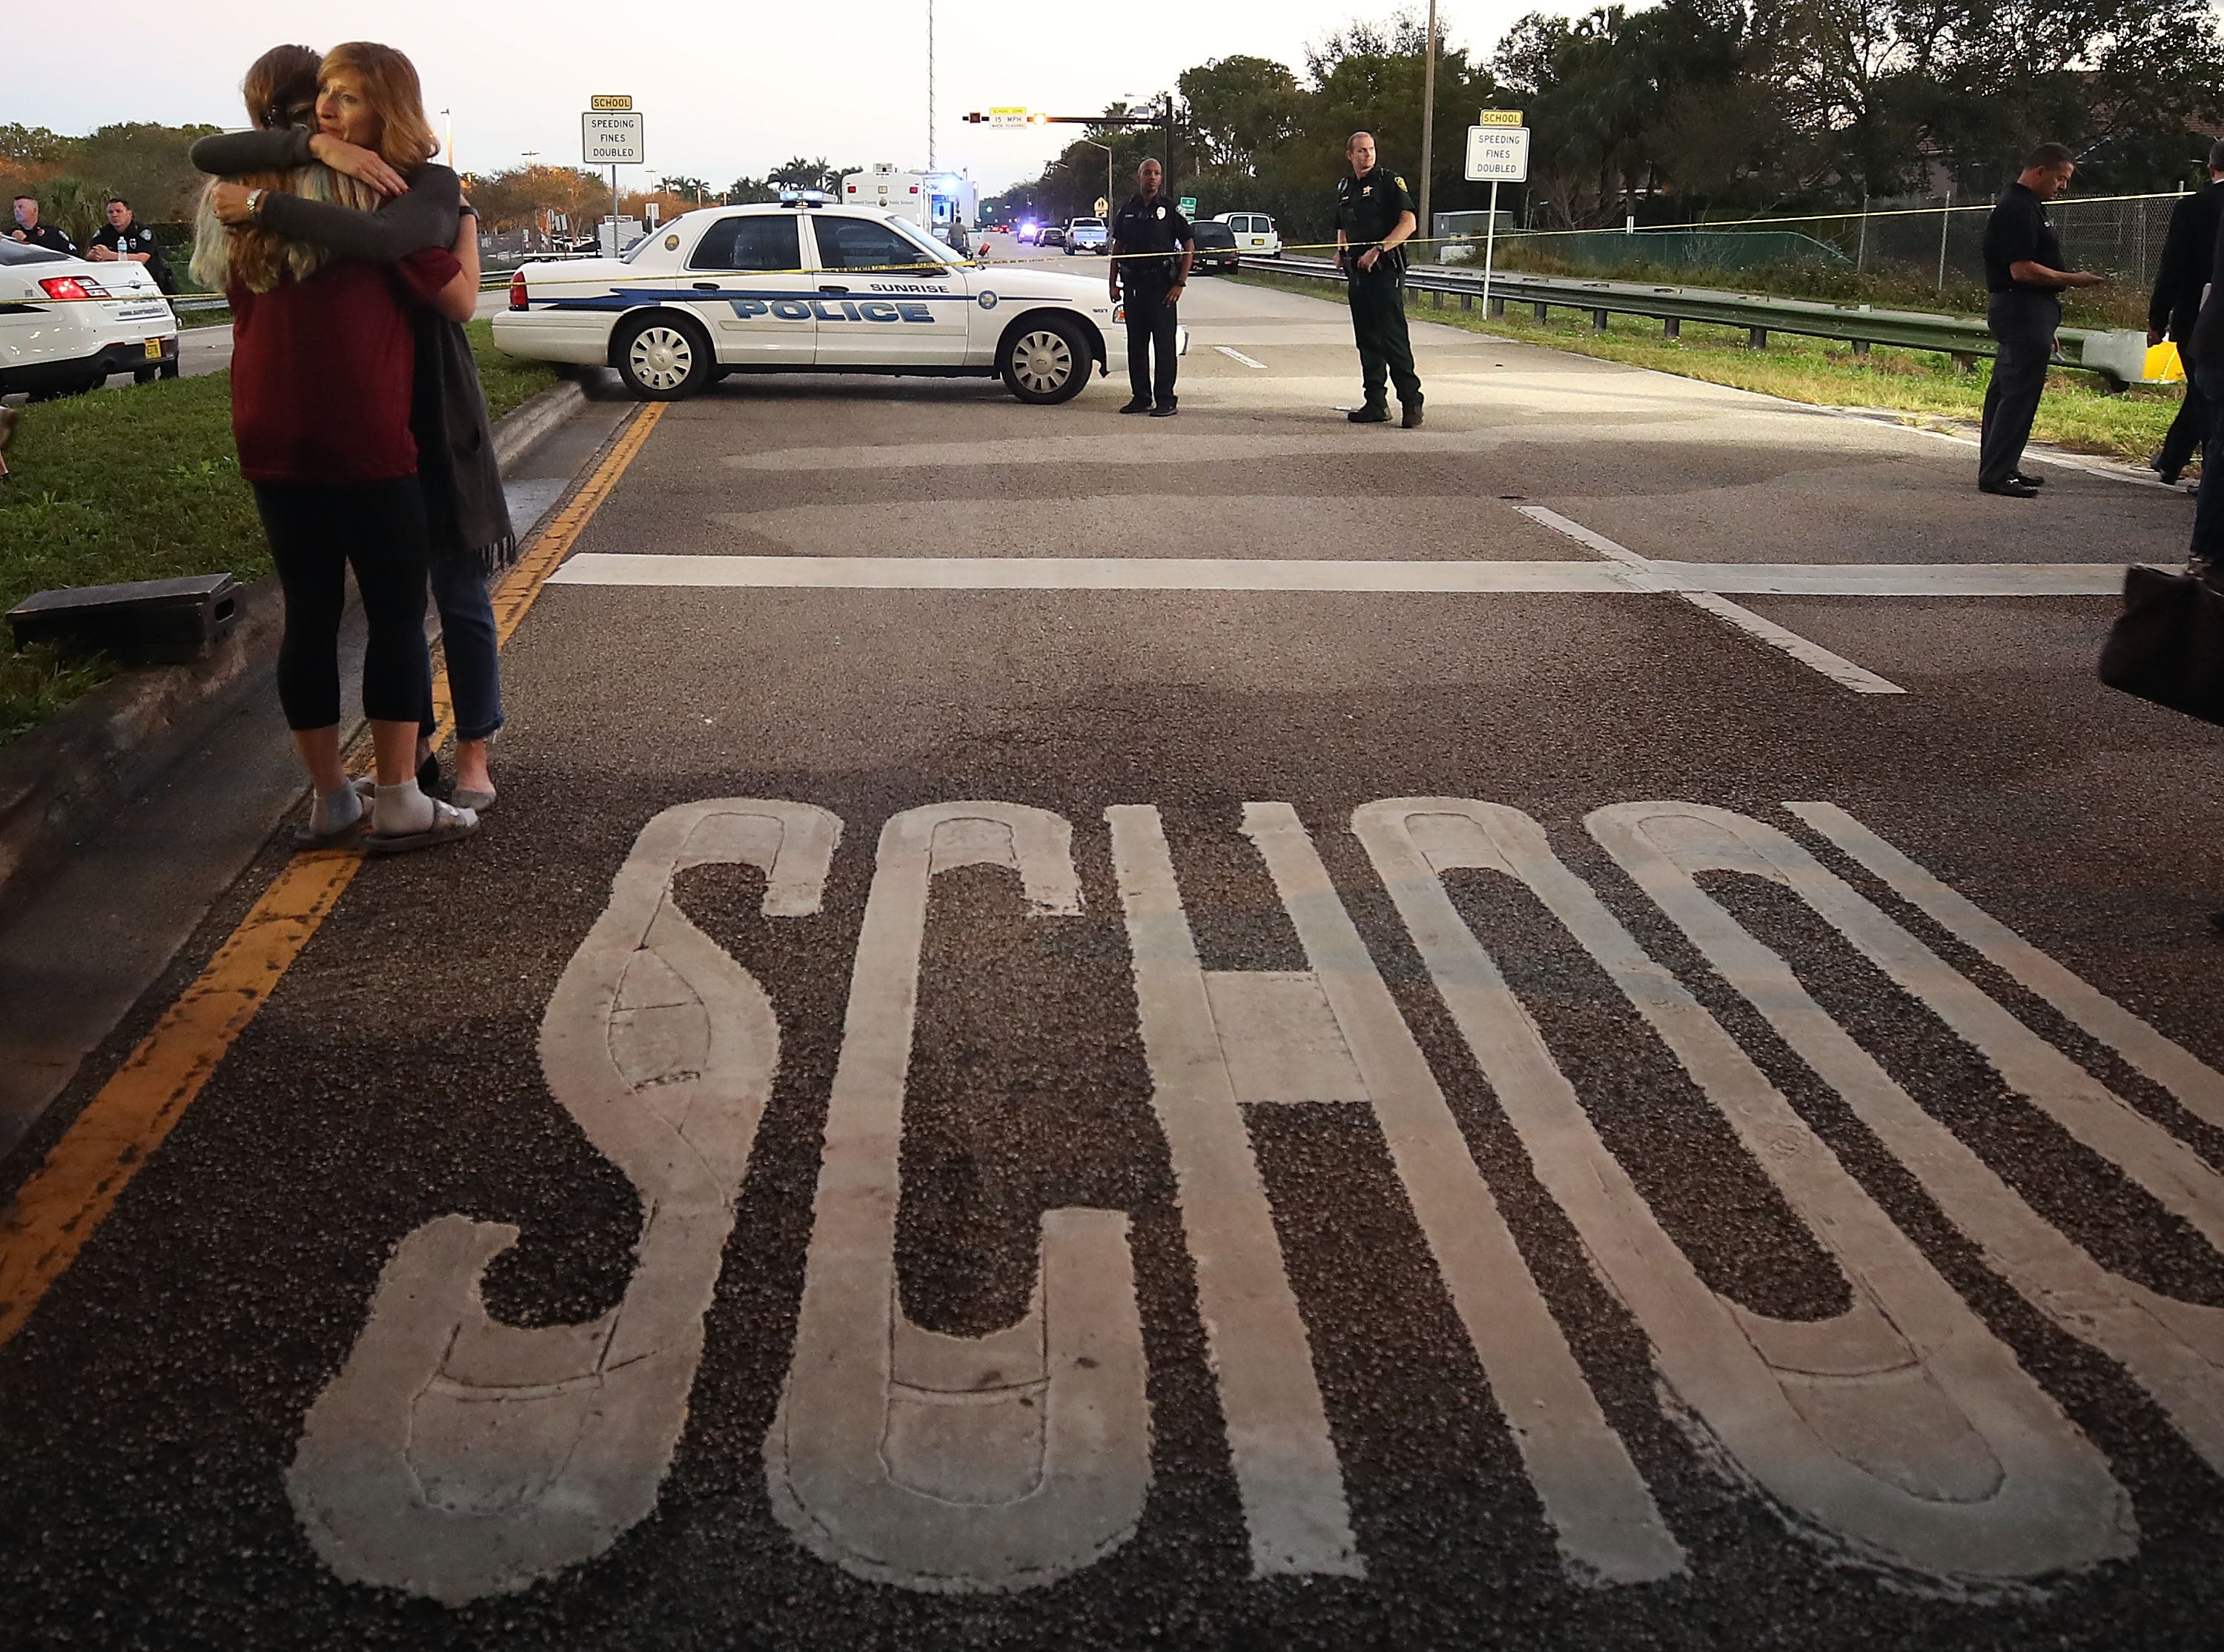 The scene of the Parkland shooting in 2018: campus police have been present for – but unable to stop – a number of school shootings